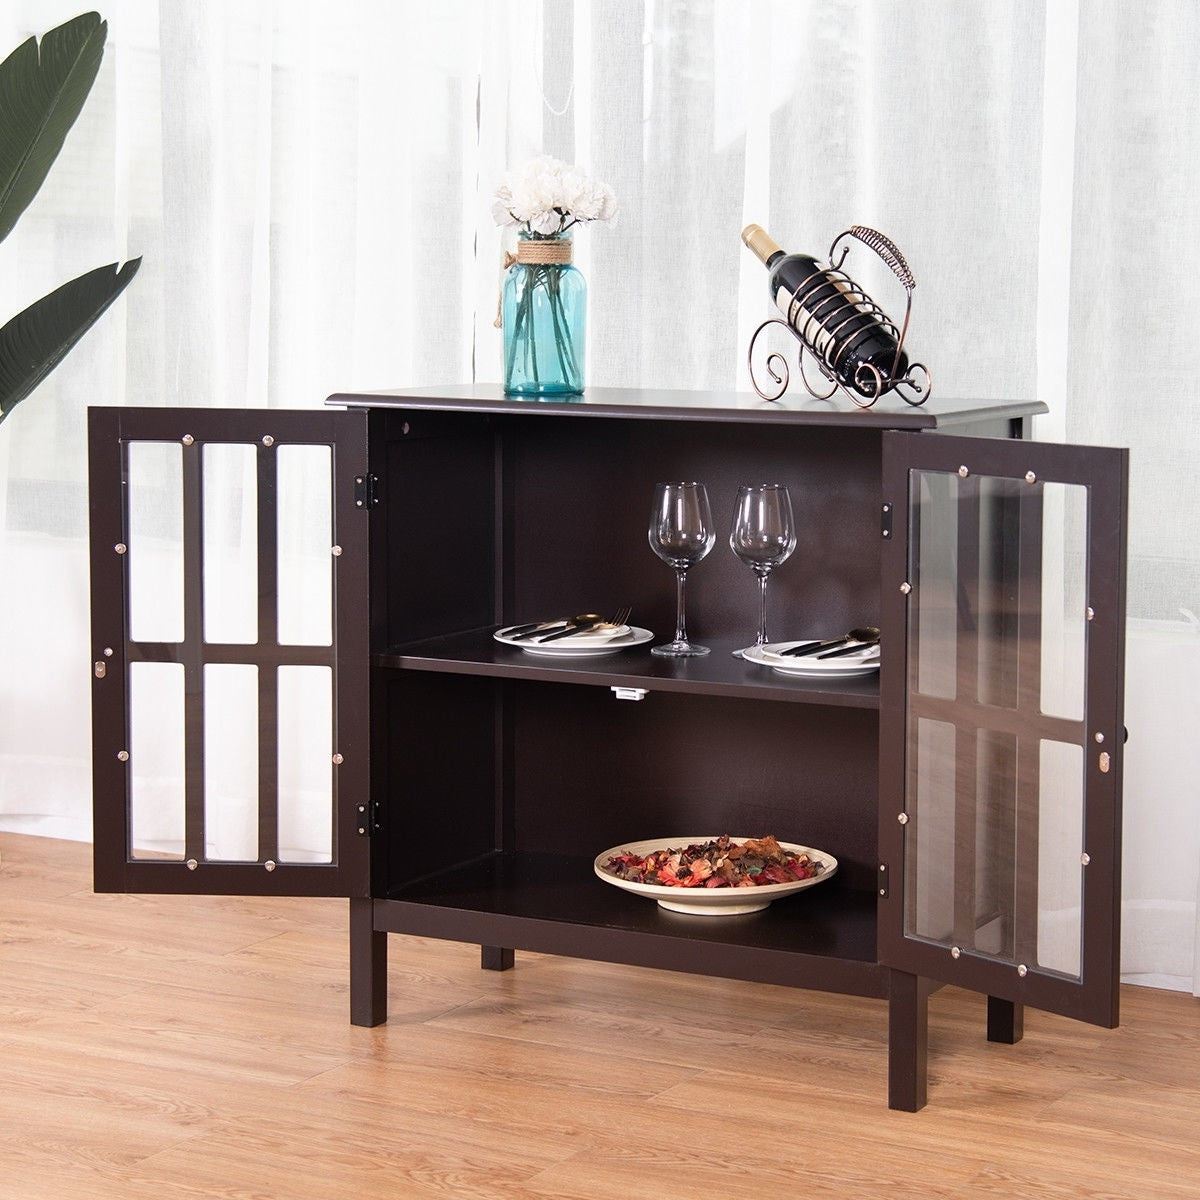 Brown Wood Sideboard Buffet Cabinet with Glass Panel Doors